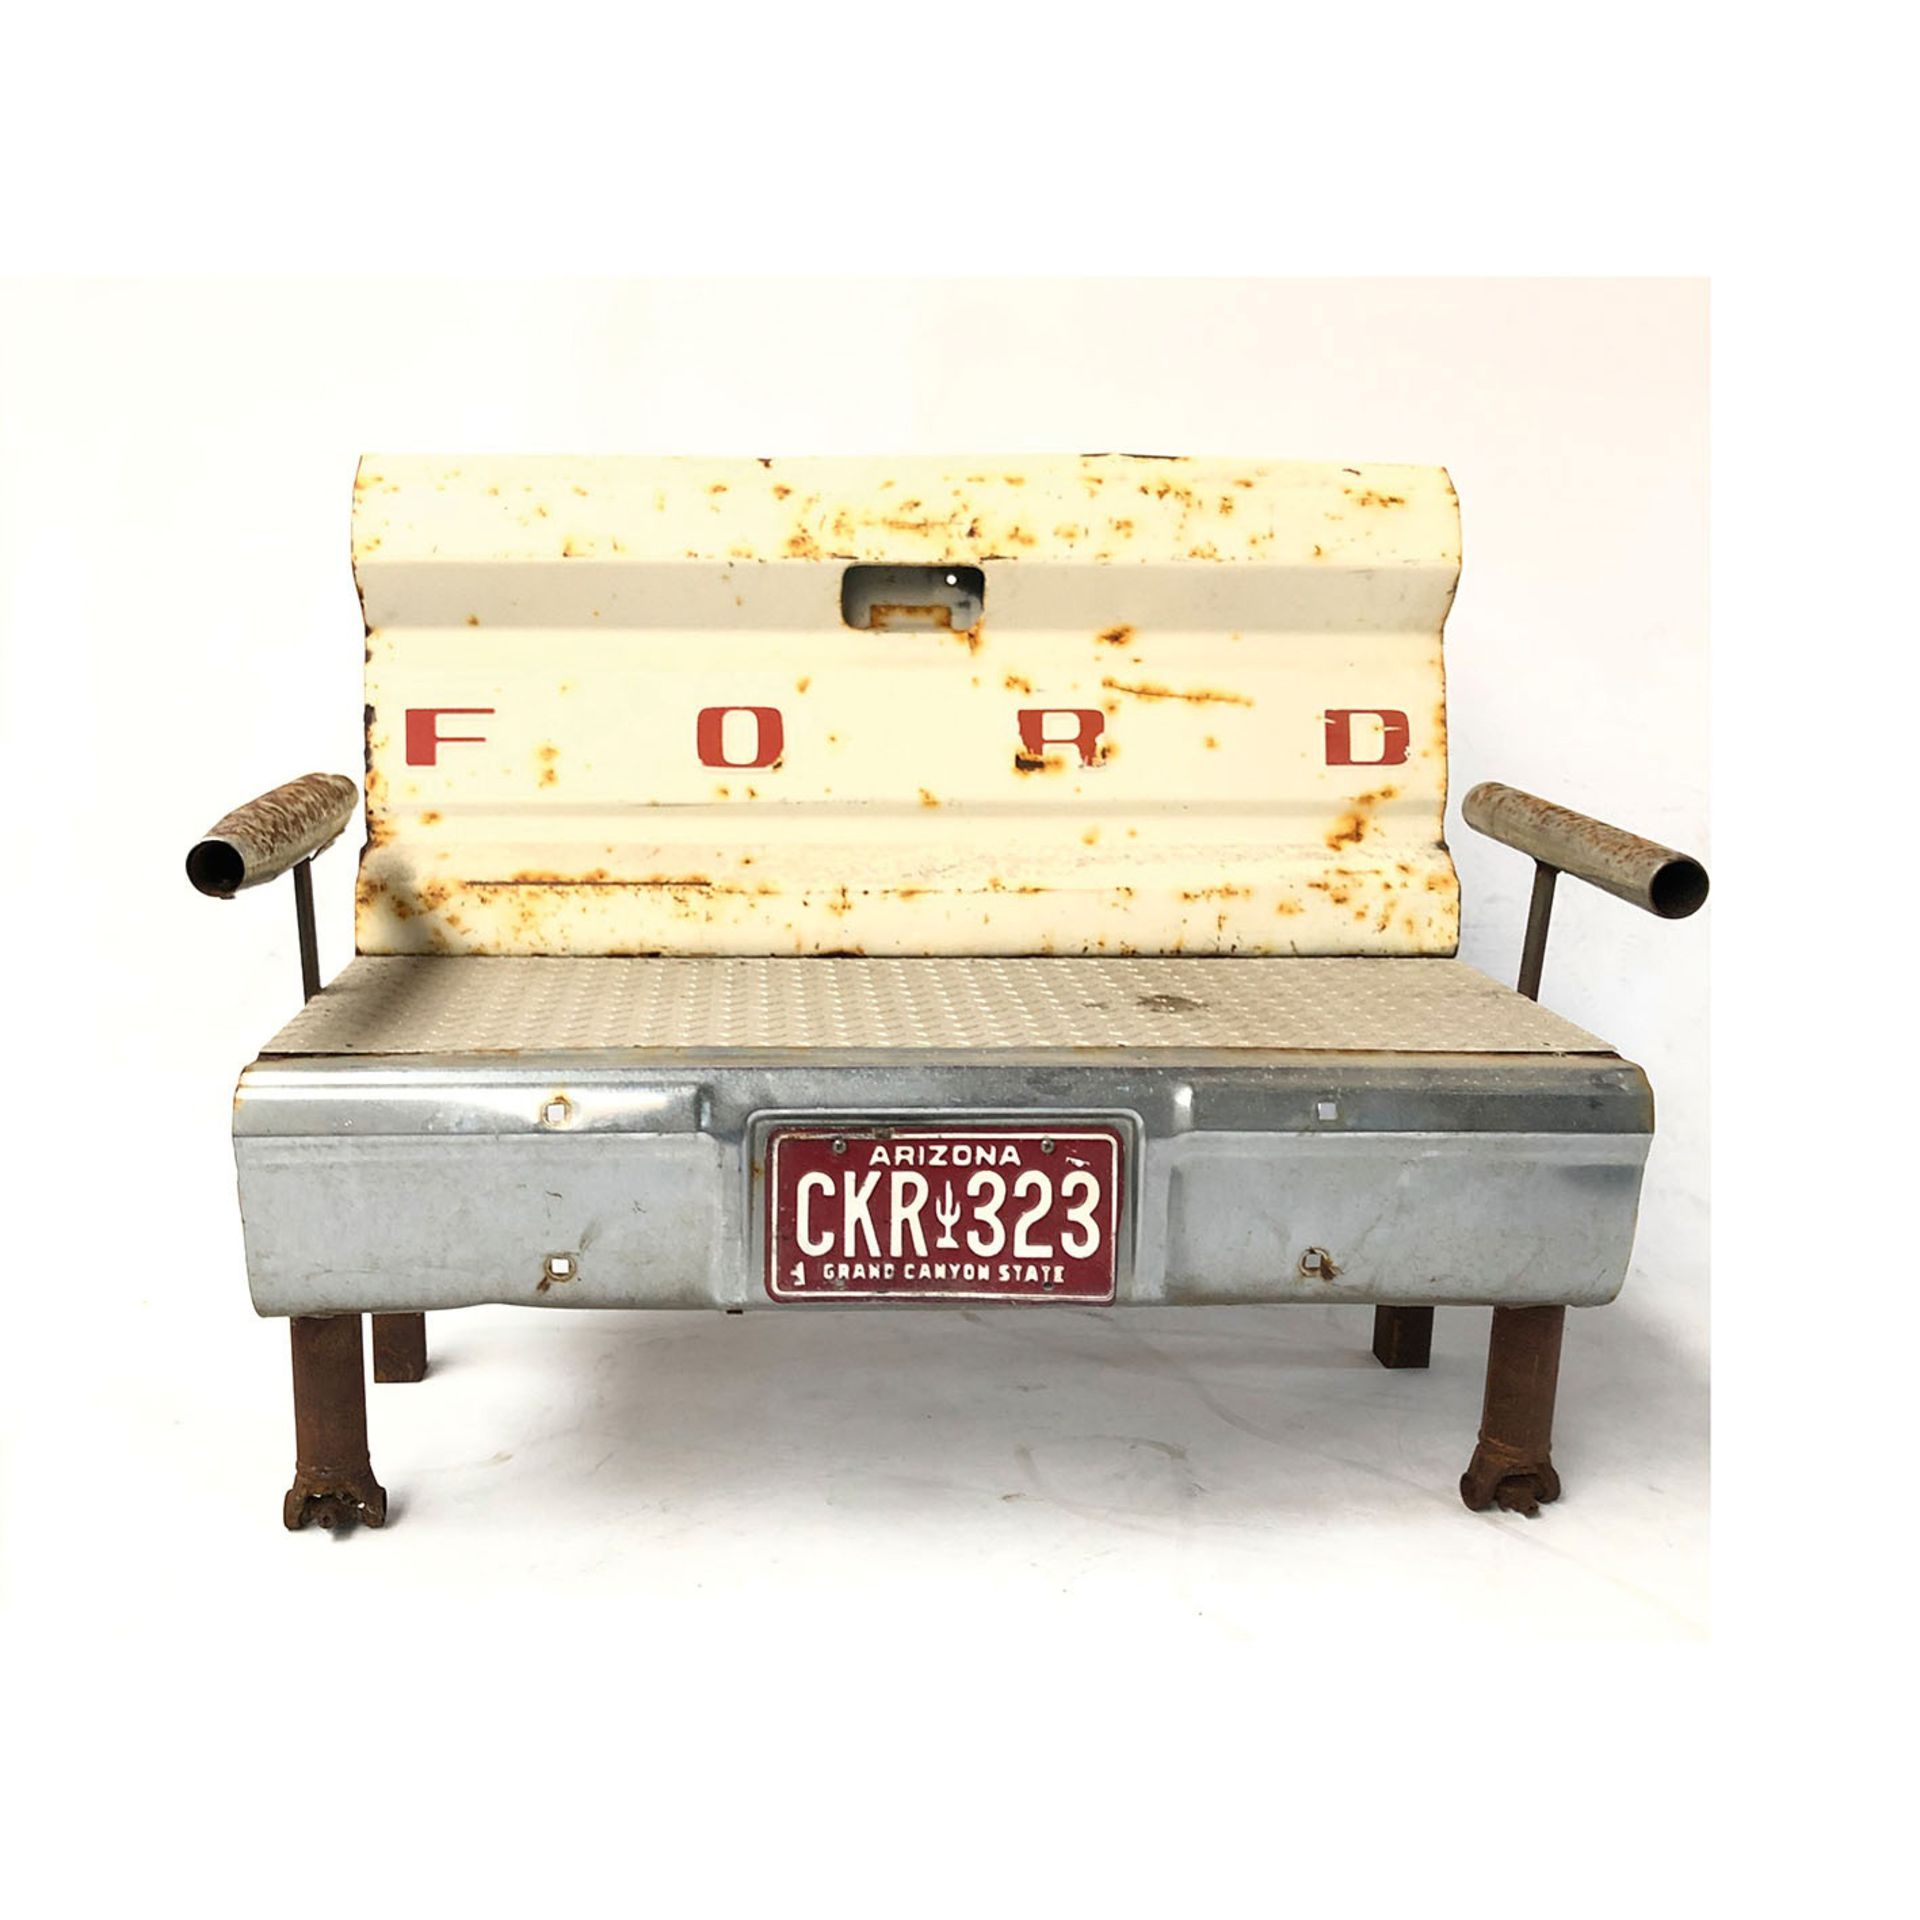 Handmade Metal Bench from Ford Pickup Parts